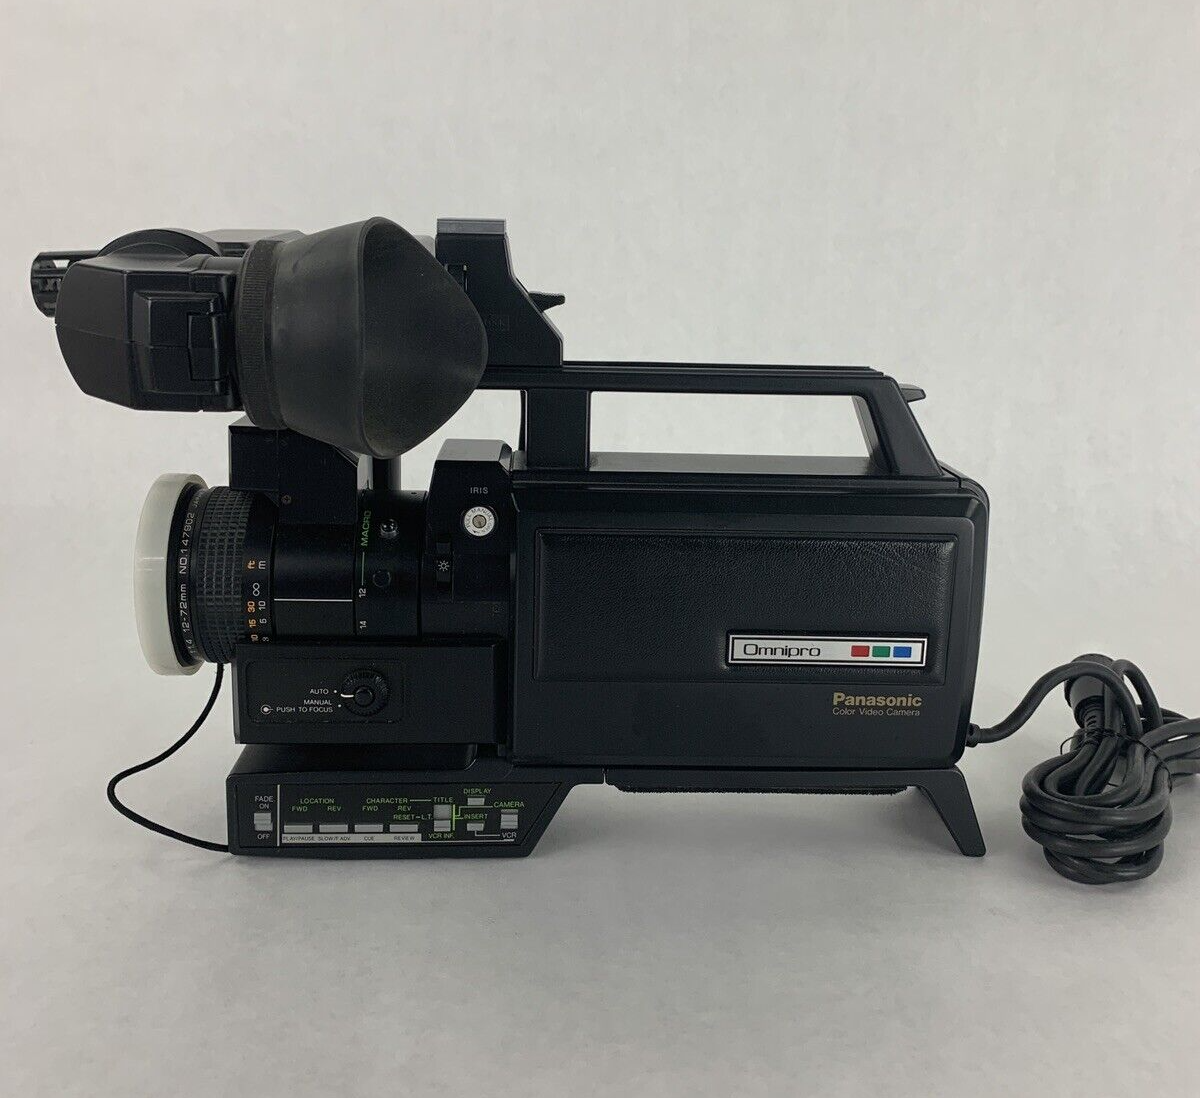 Panasonic Color Video Camera Omnipro x6 Power Zoom PK-956 Untested